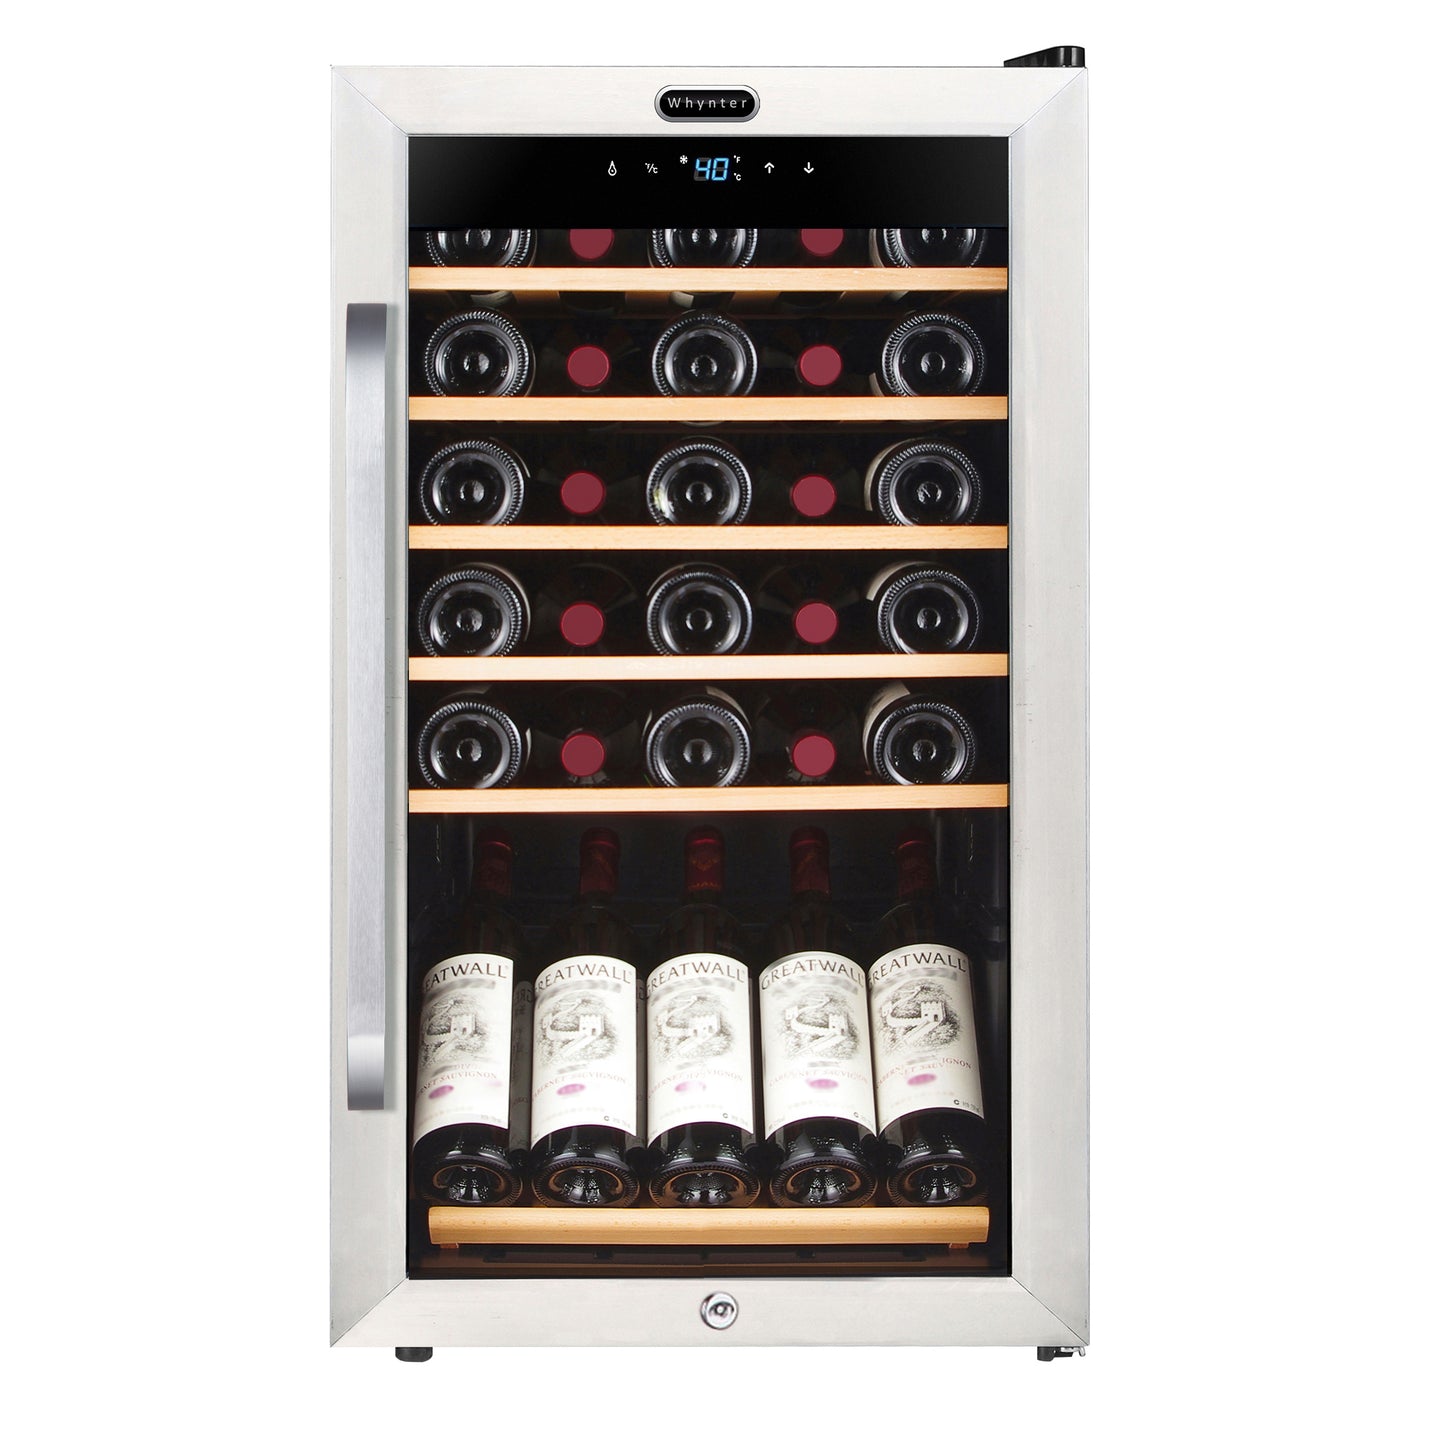 A stainless steel wine cooler with 166 bottles of wine, LED lights, and adjustable shelves.